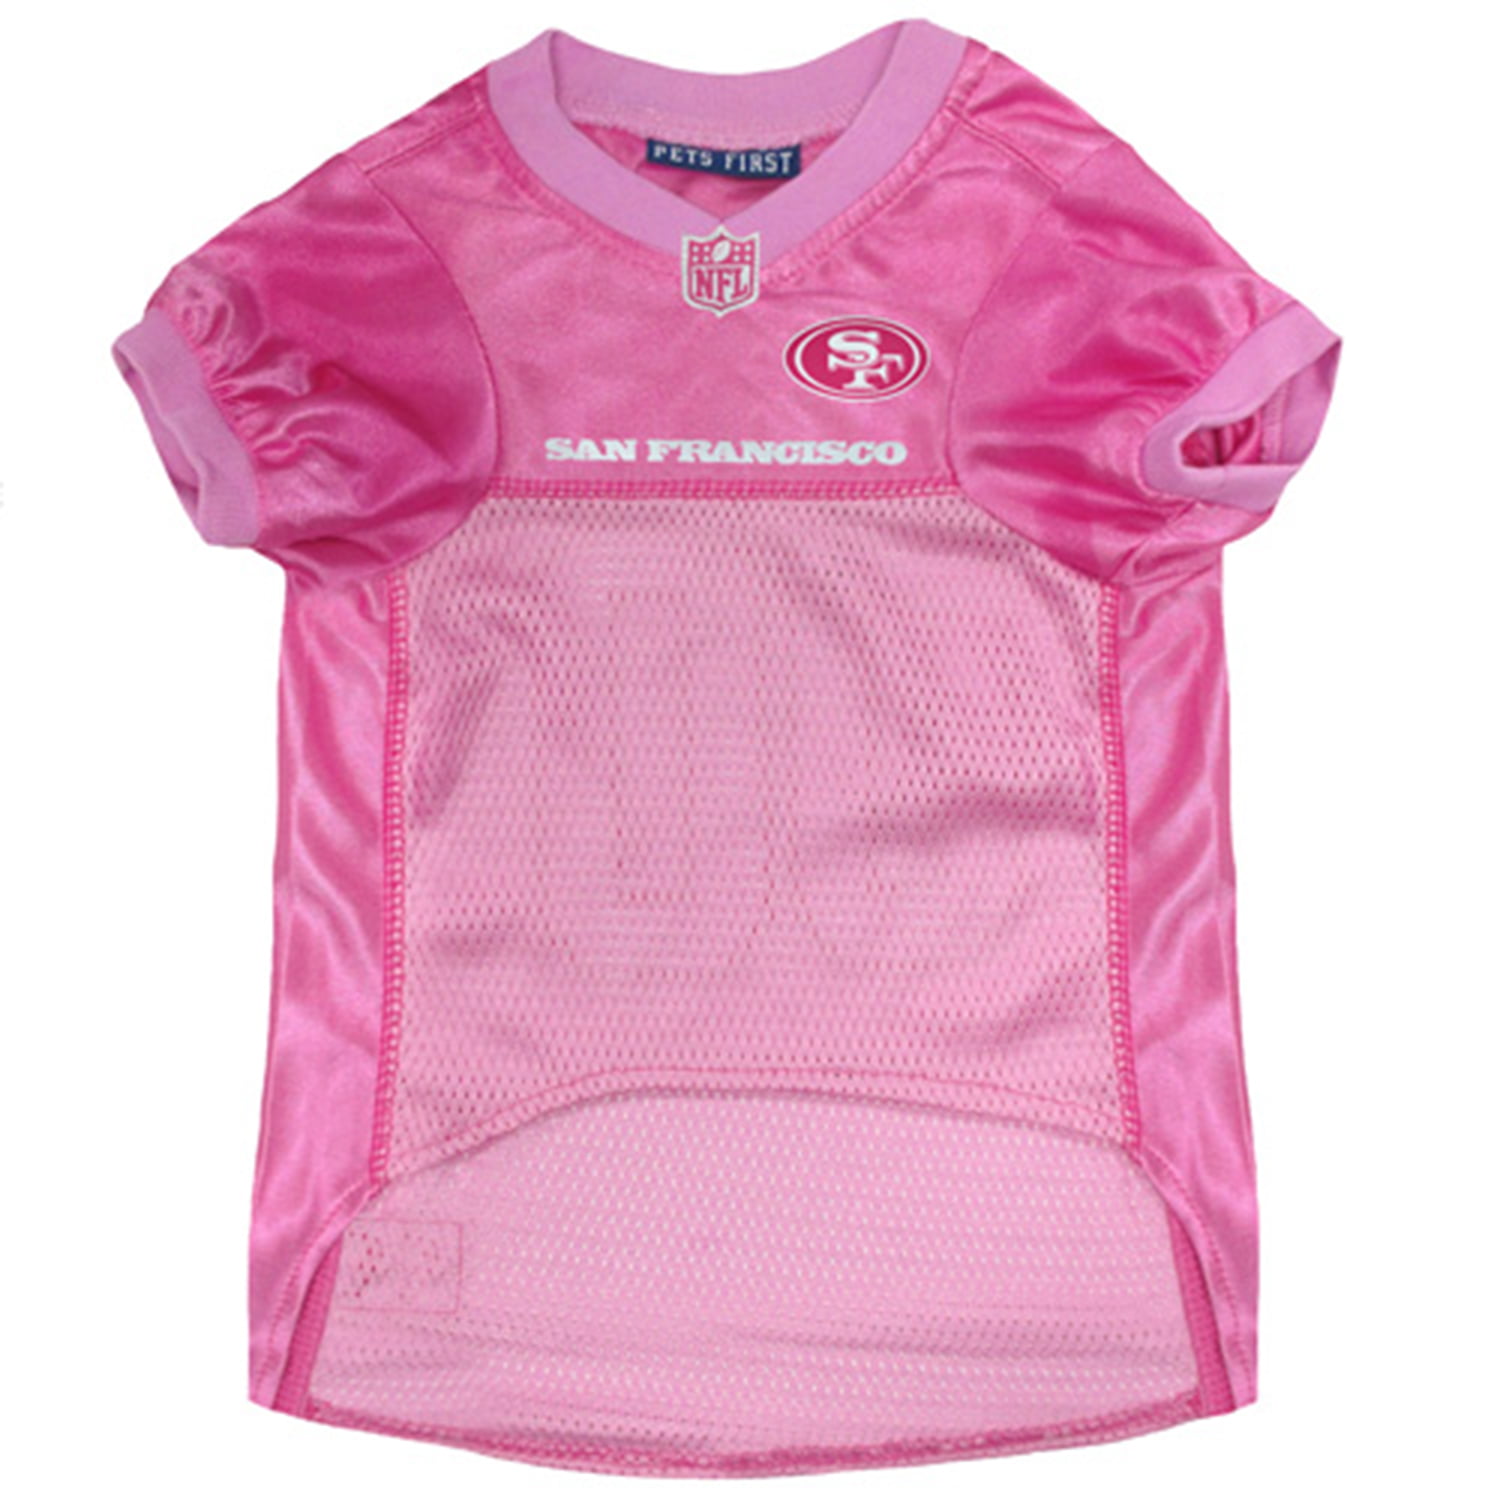 NCAA Dog Pink Football Jersey Pet Pink Sports Outfit 